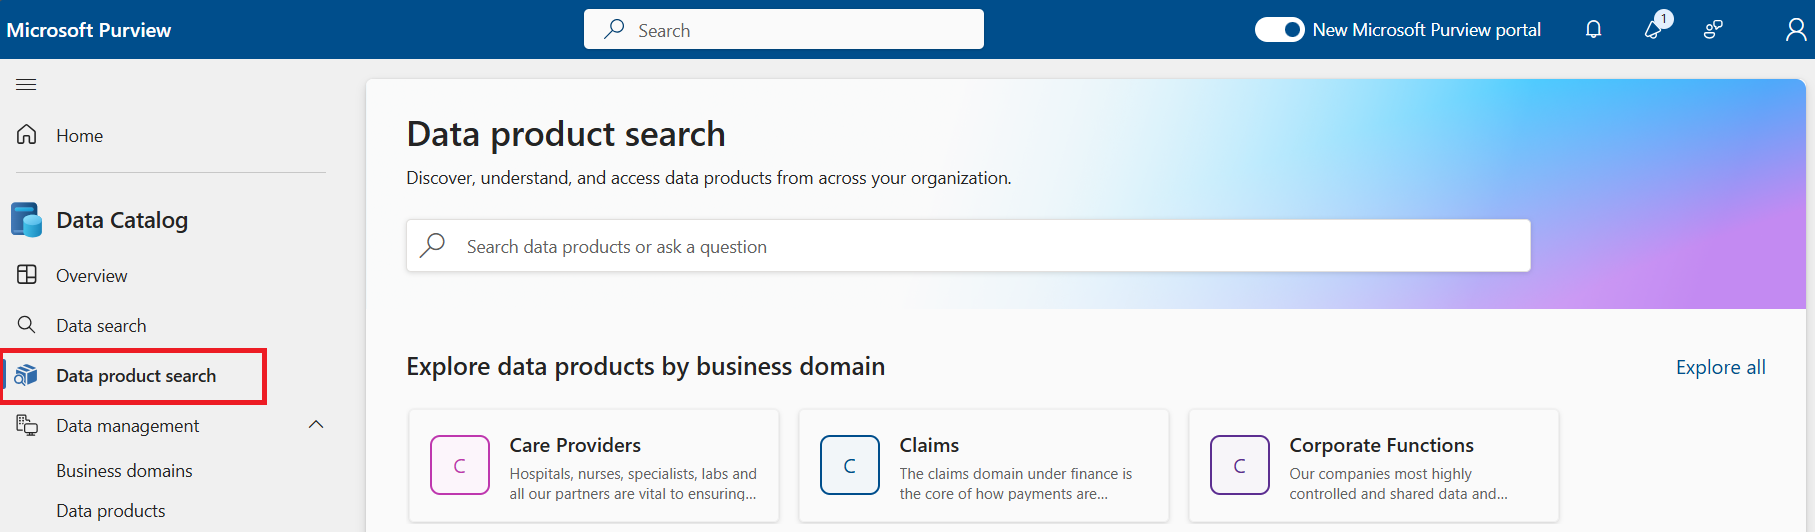 Screenshot of the data product search results with the filters highlighted.